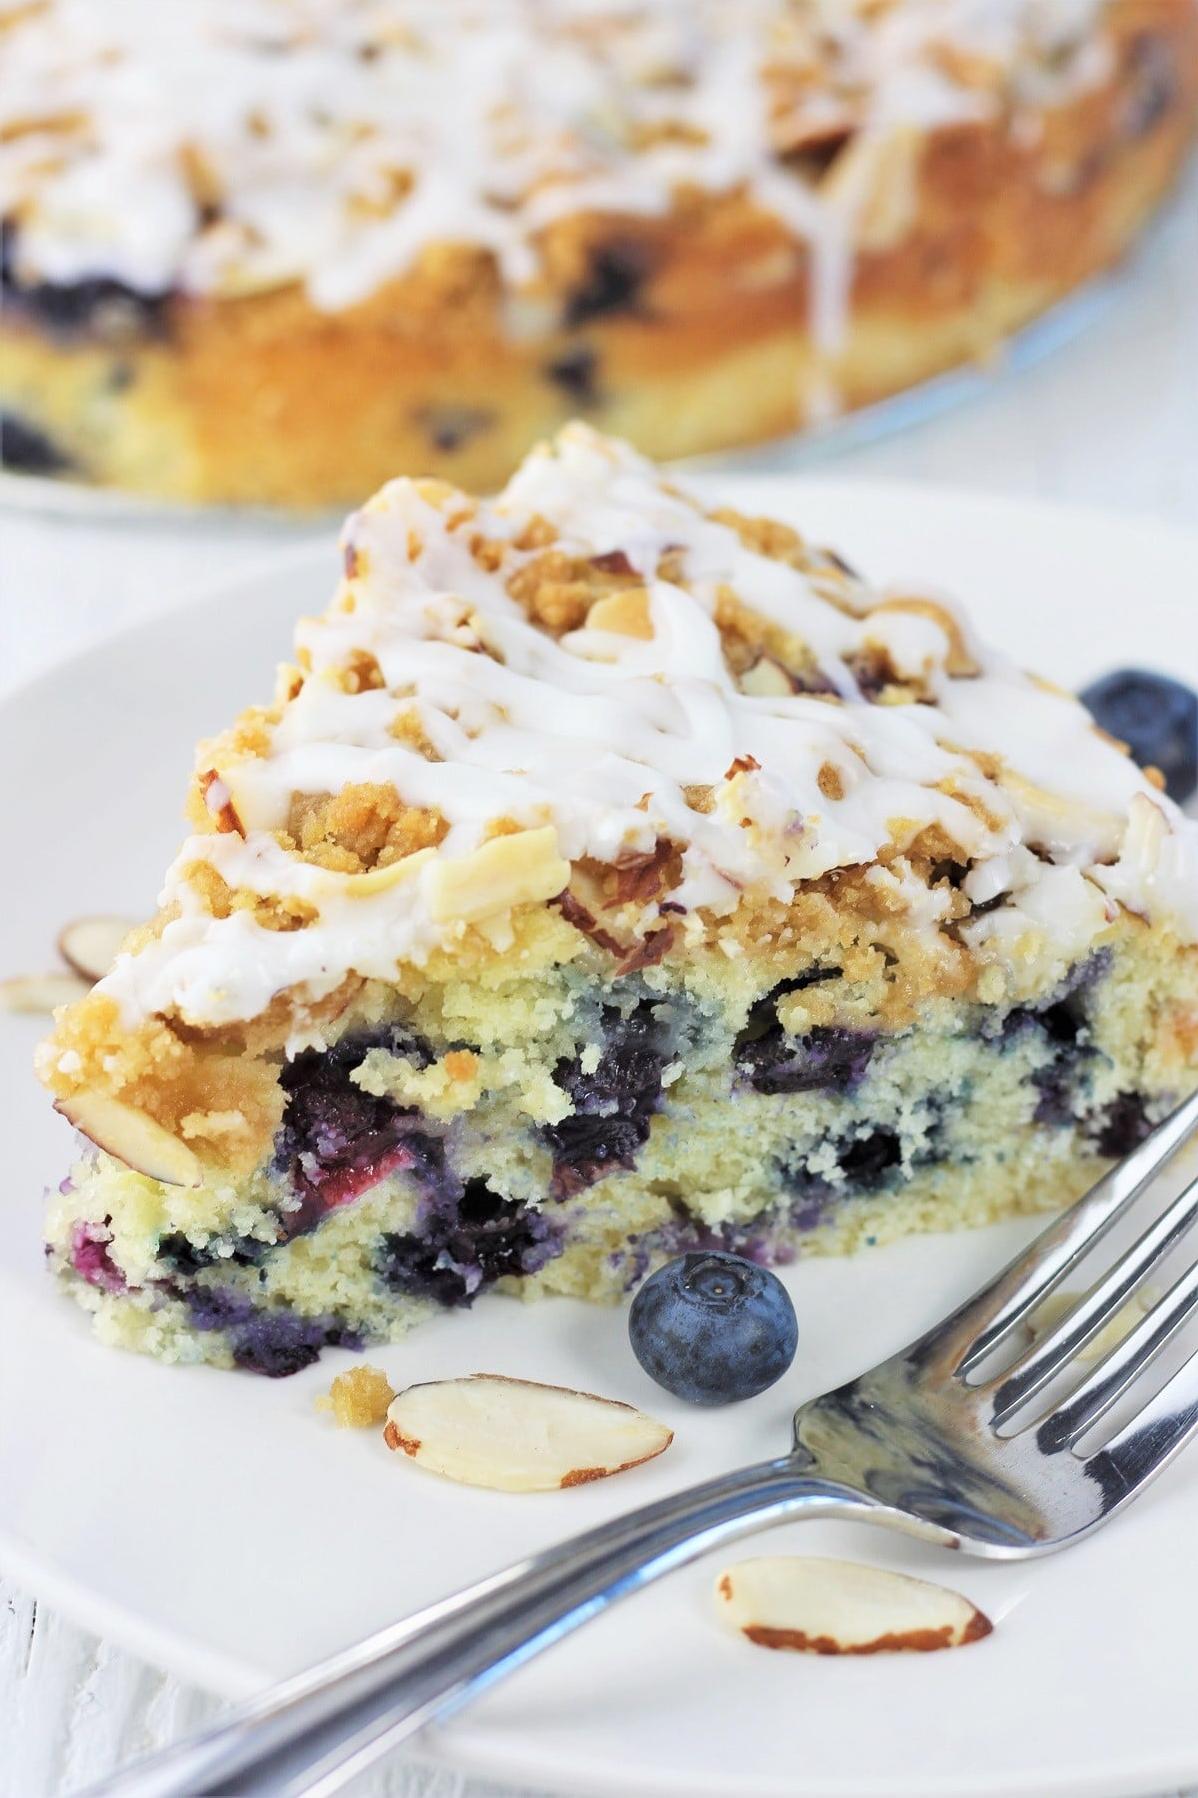  Satisfy your sweet tooth cravings with this delightful and easy-to-make cake.